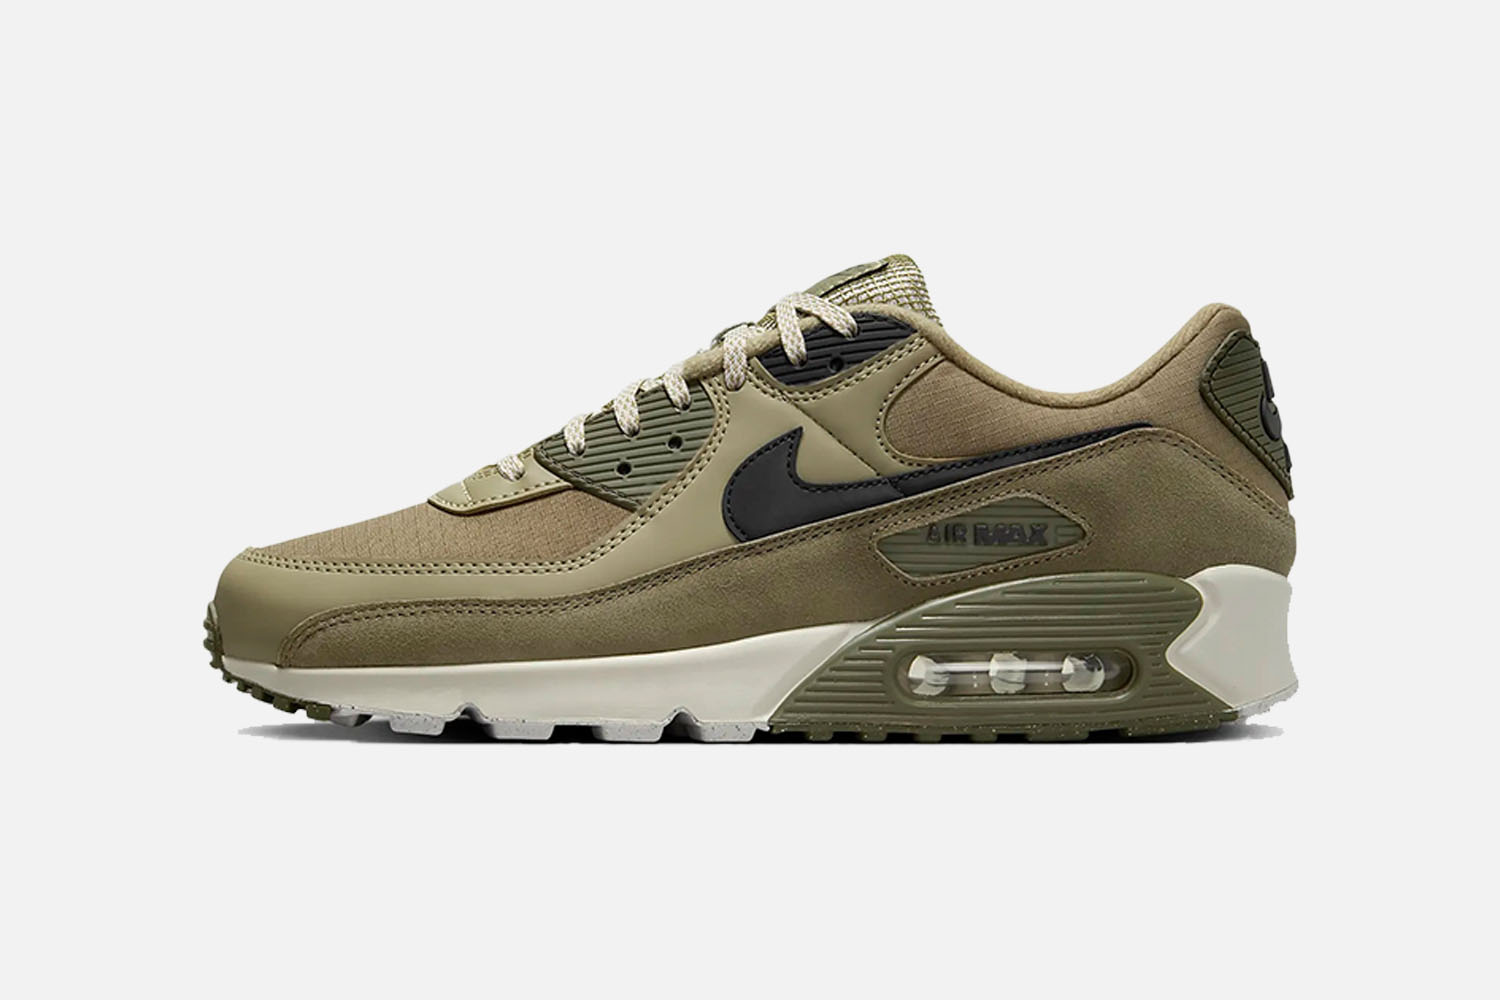 From 1 to 270: The Nike Air Max Sneaker Guide - InsideHook